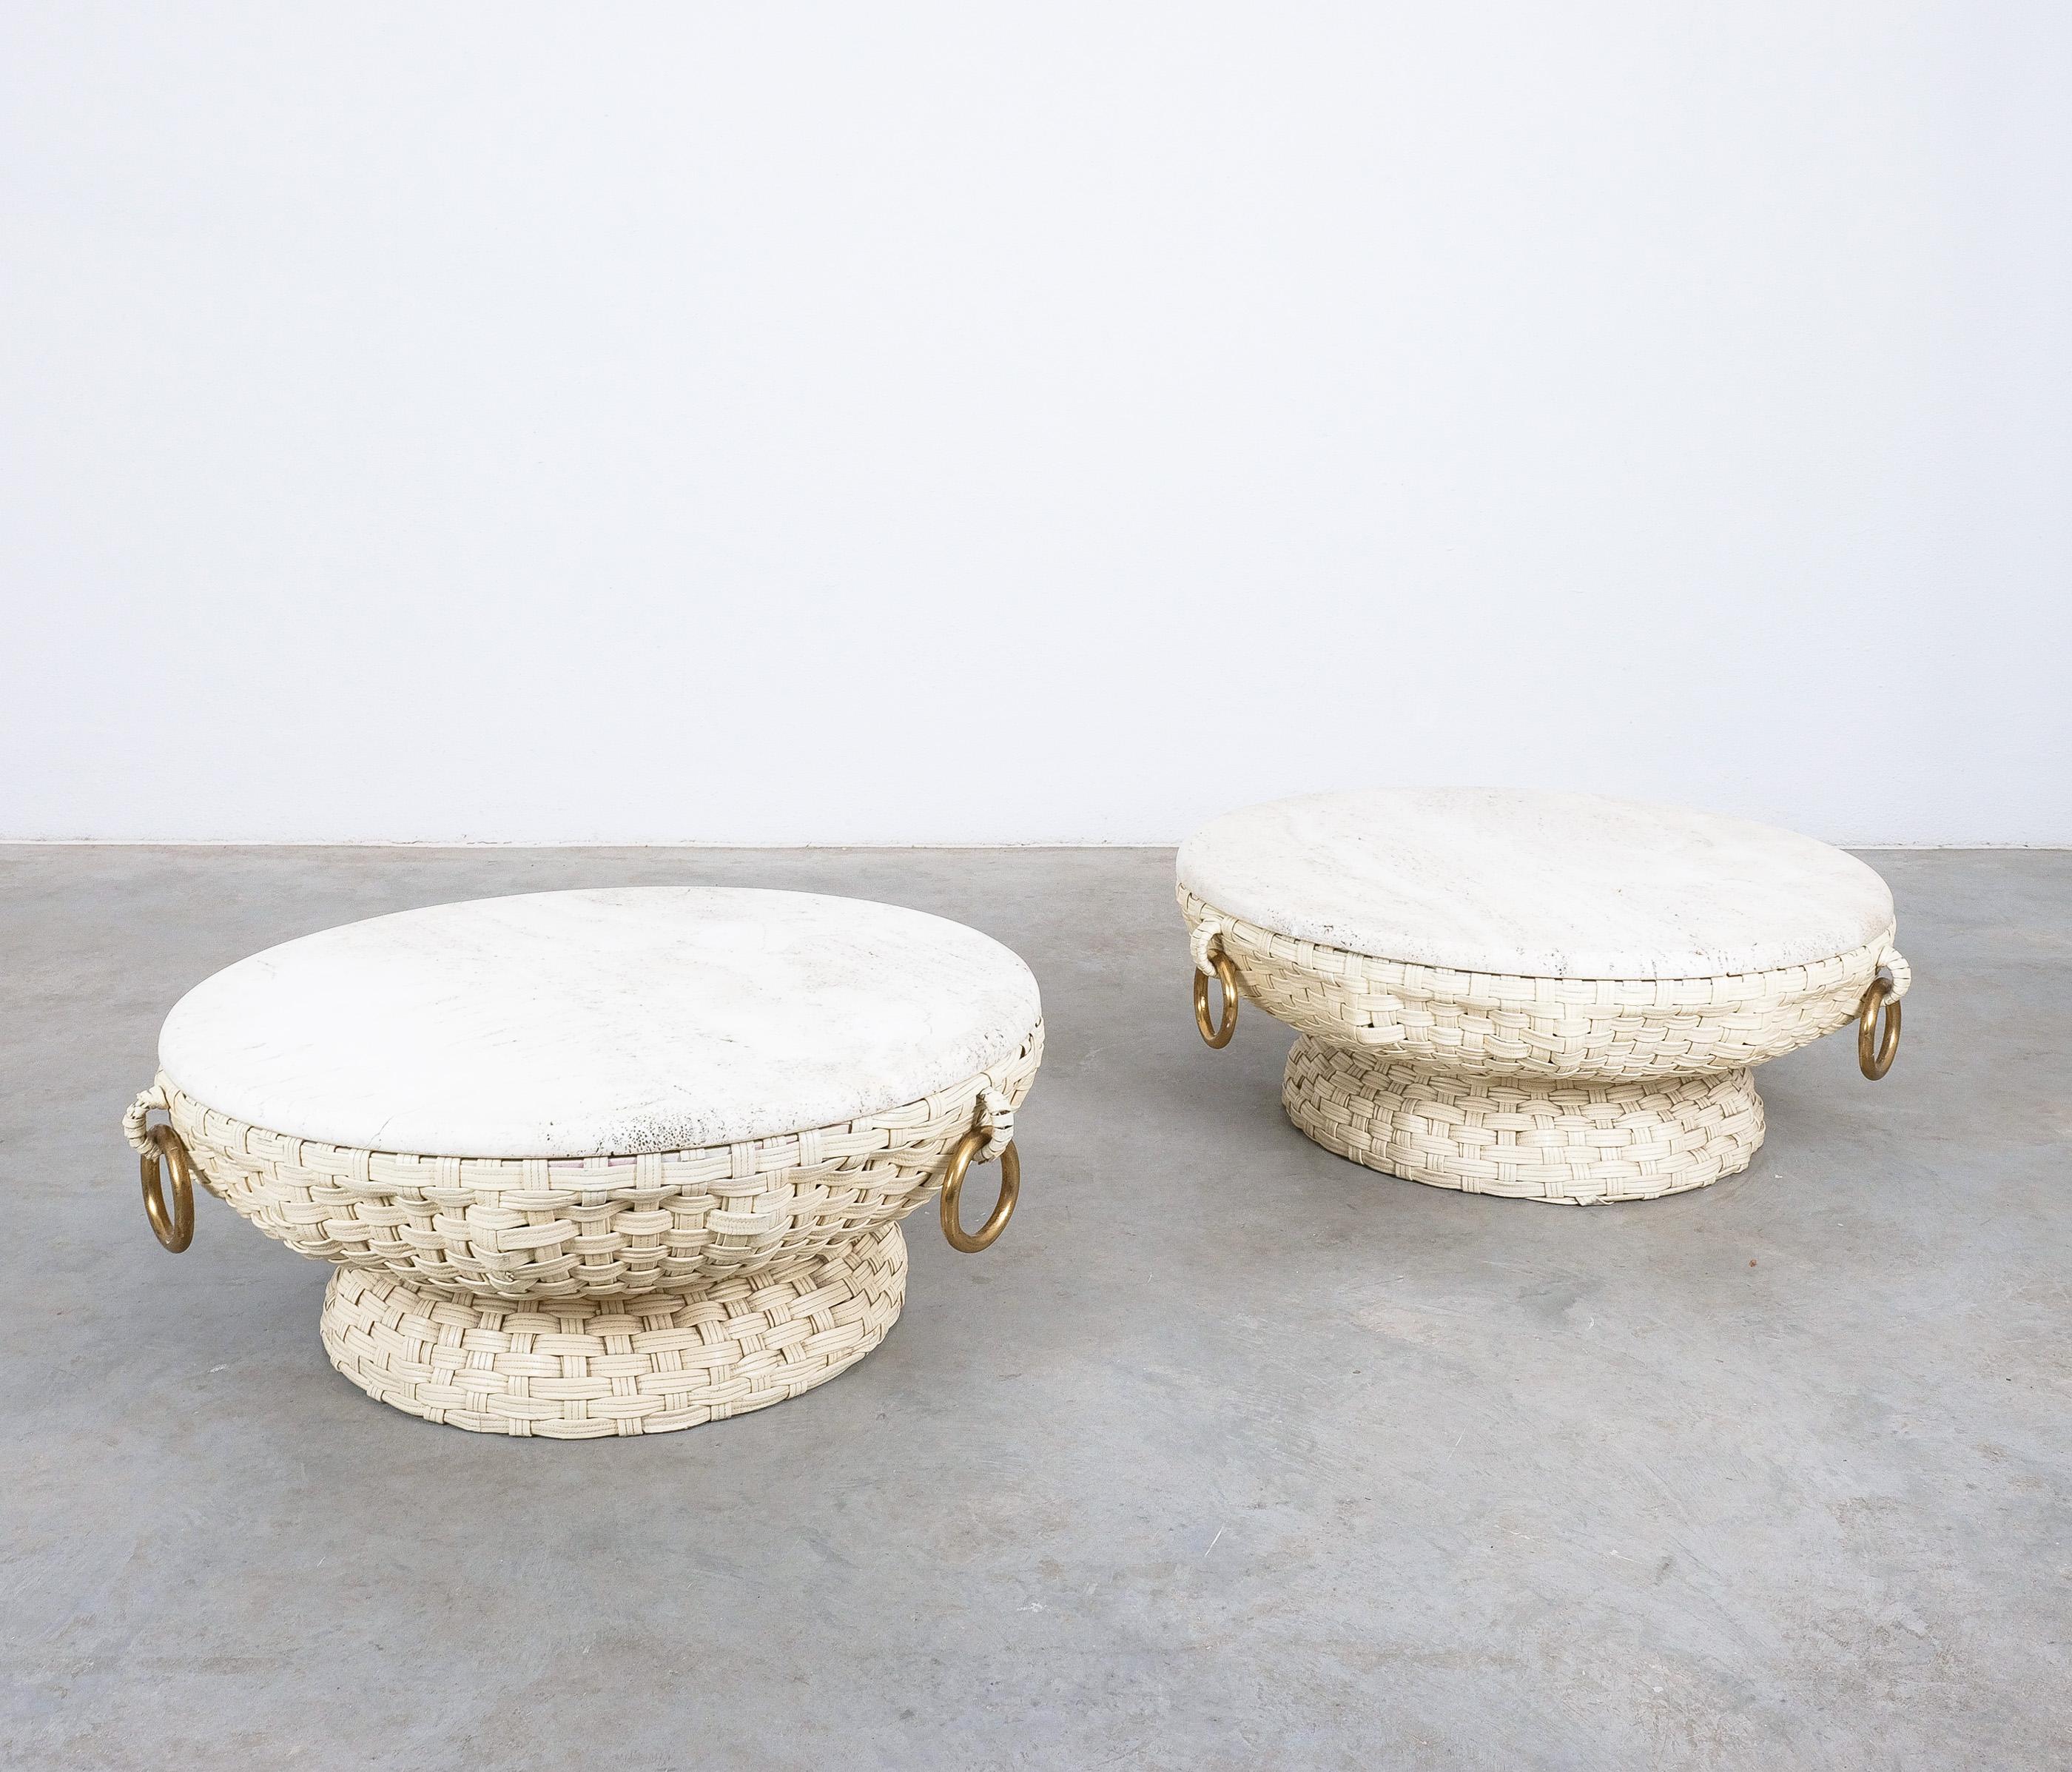 A Pair of Low Coffee Tables with Travertine Top by Marzio Cecchi for Studio Most, 1970s
This is a very rare set of white (cru)  woven leather coffee tables by Marzio Cecchi. Both are identical and well sized with a diameter of 36